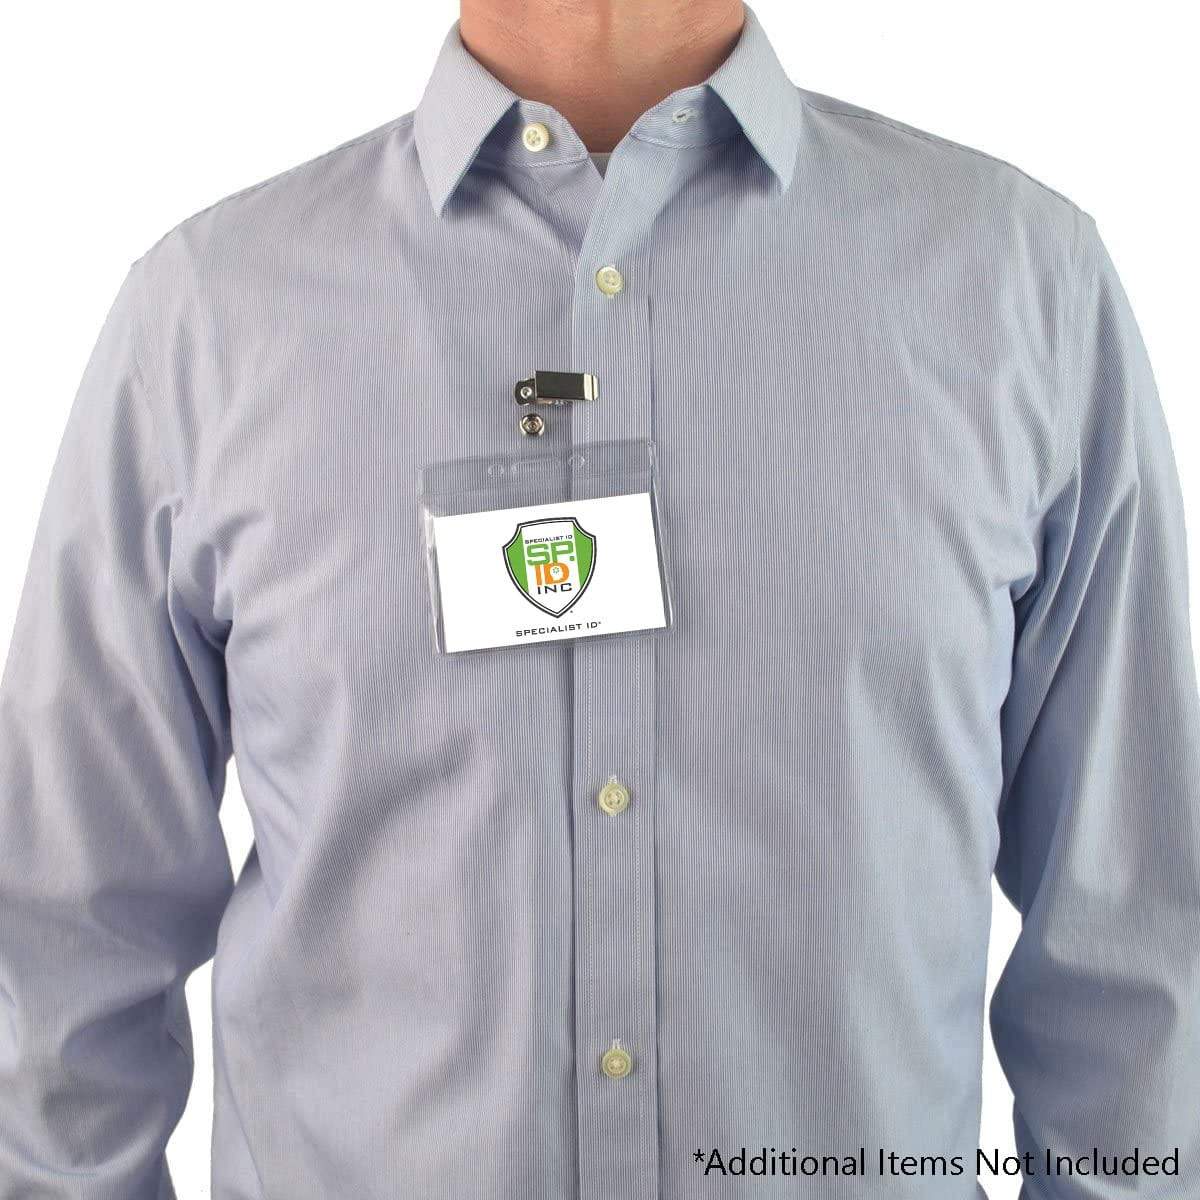 A person wearing a light blue button-down shirt with a Standard Horizontal Vinyl ID Badge Holder (1820-1000) attached to the top pocket, displaying a logo. Text at the bottom reads "Additional Items Not Included.